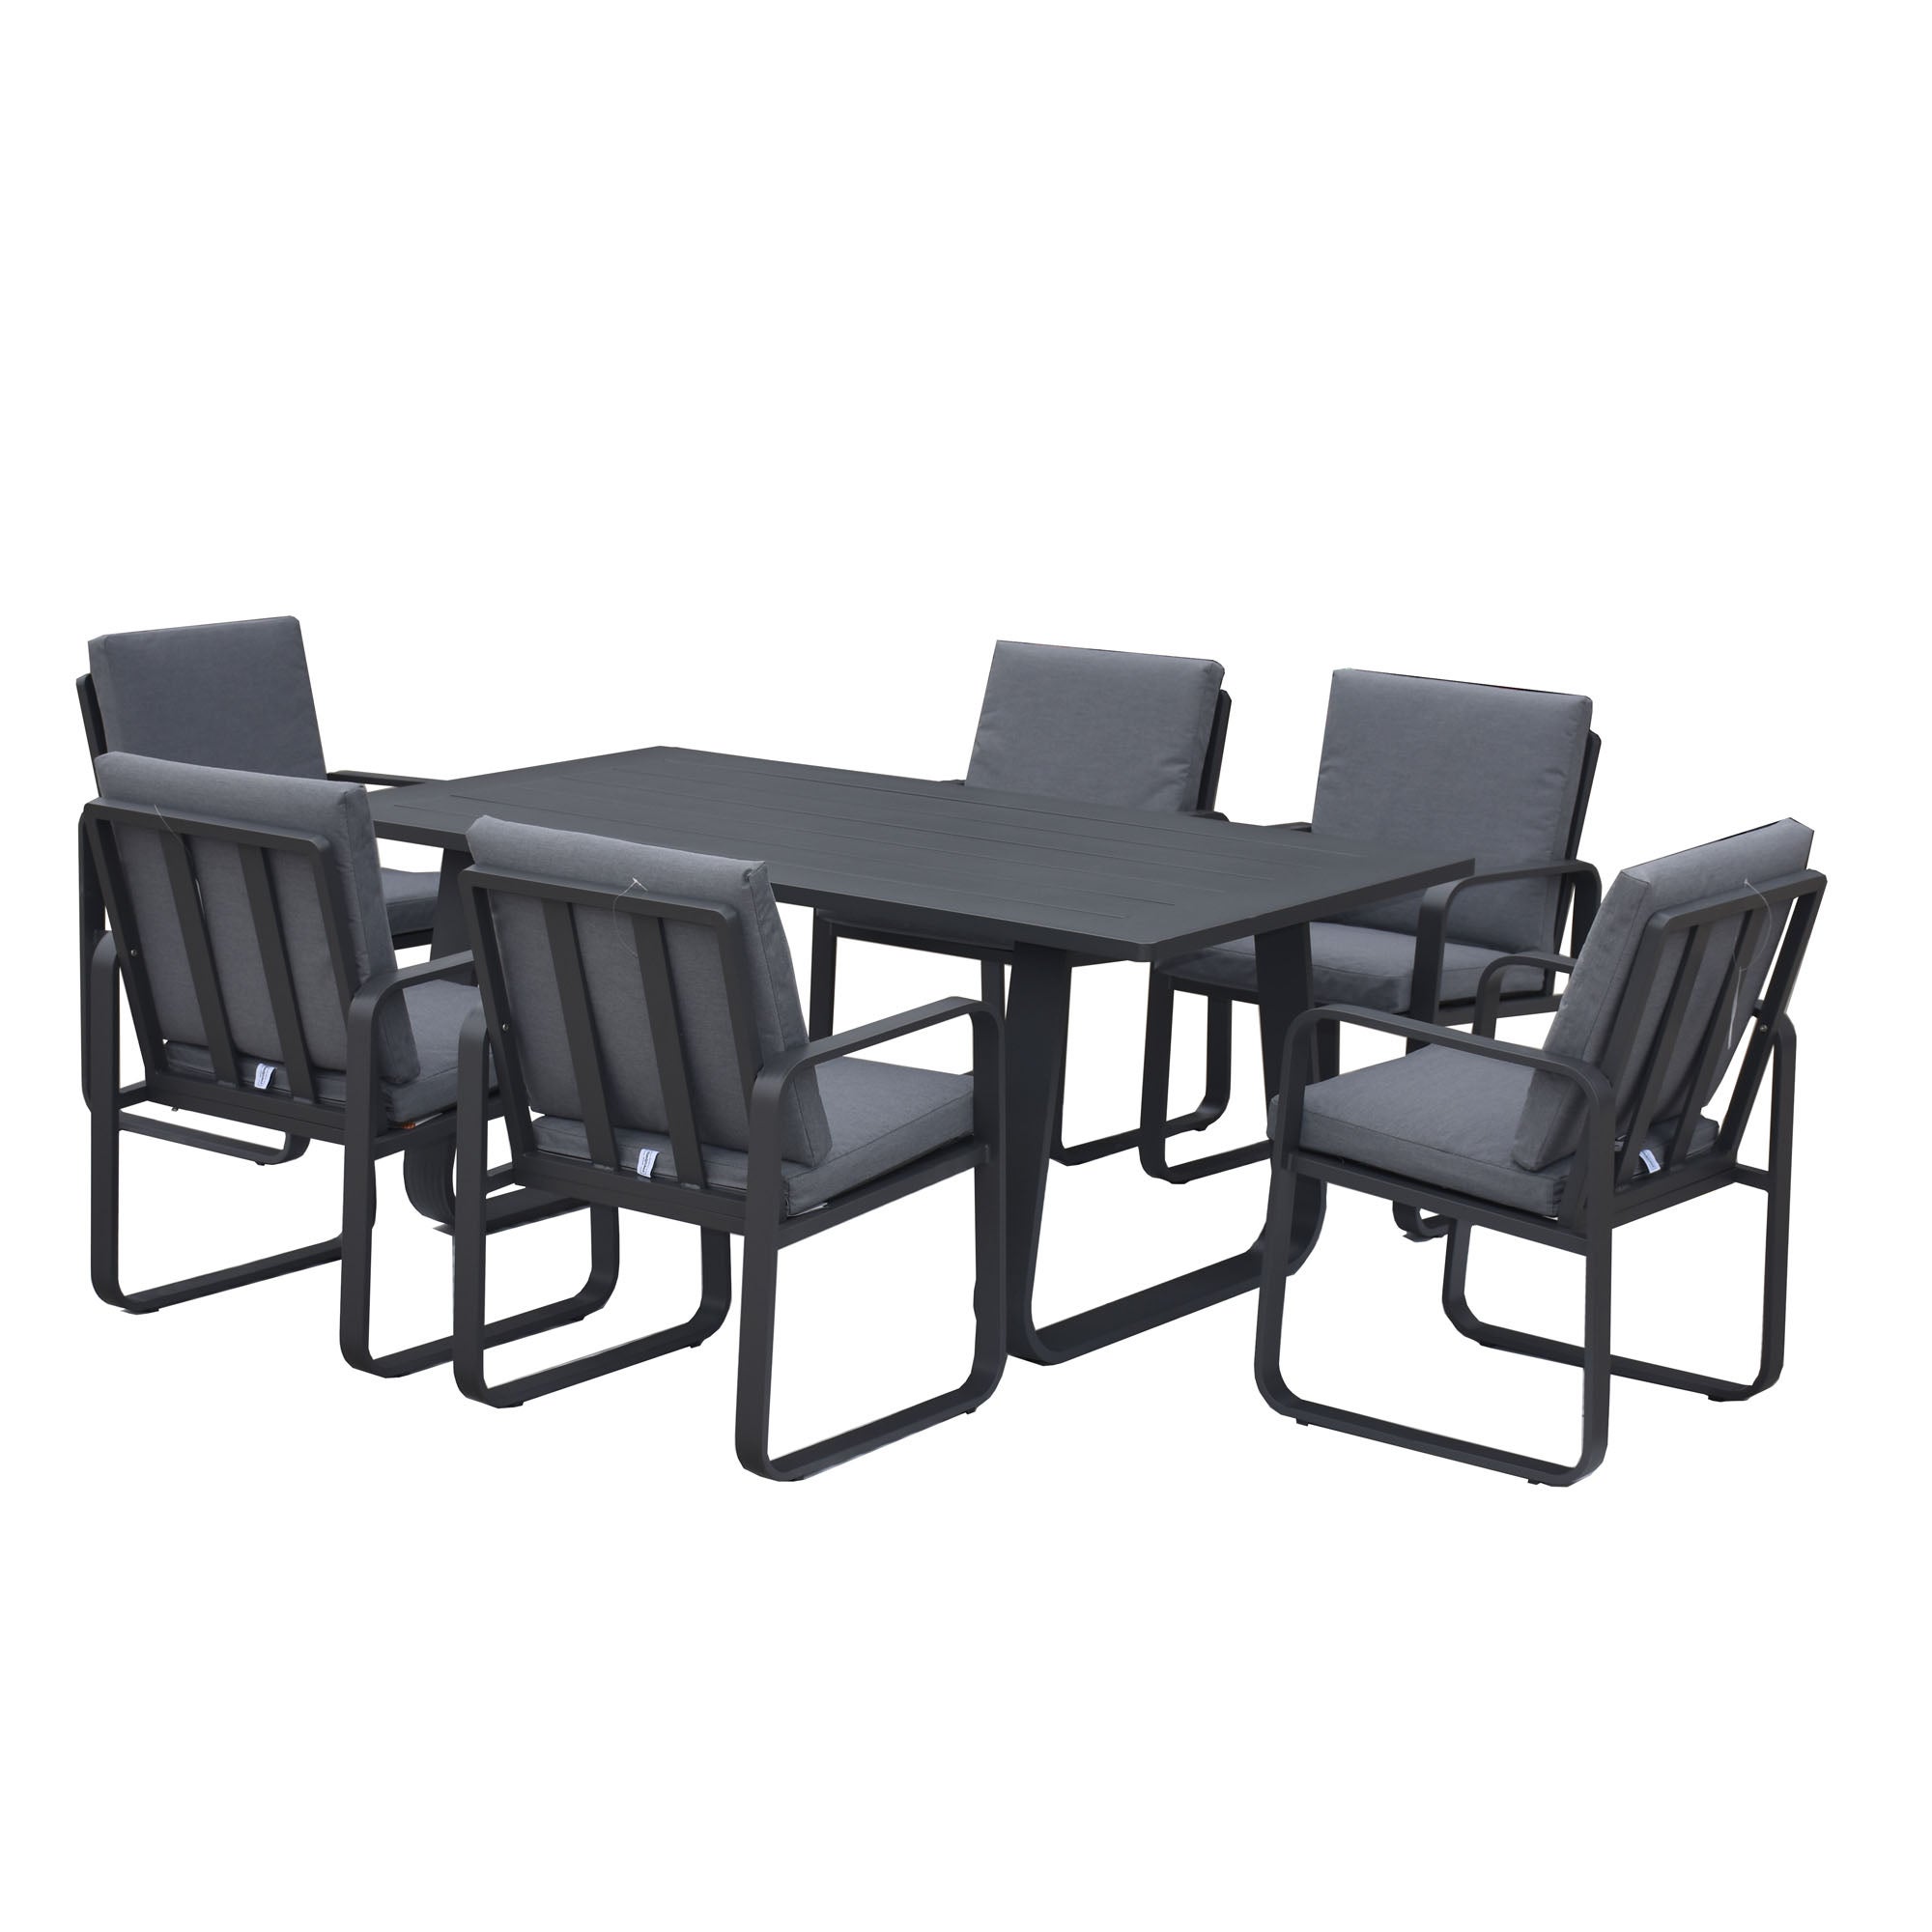 Babingley 6 Seater Dining Set Anthracite